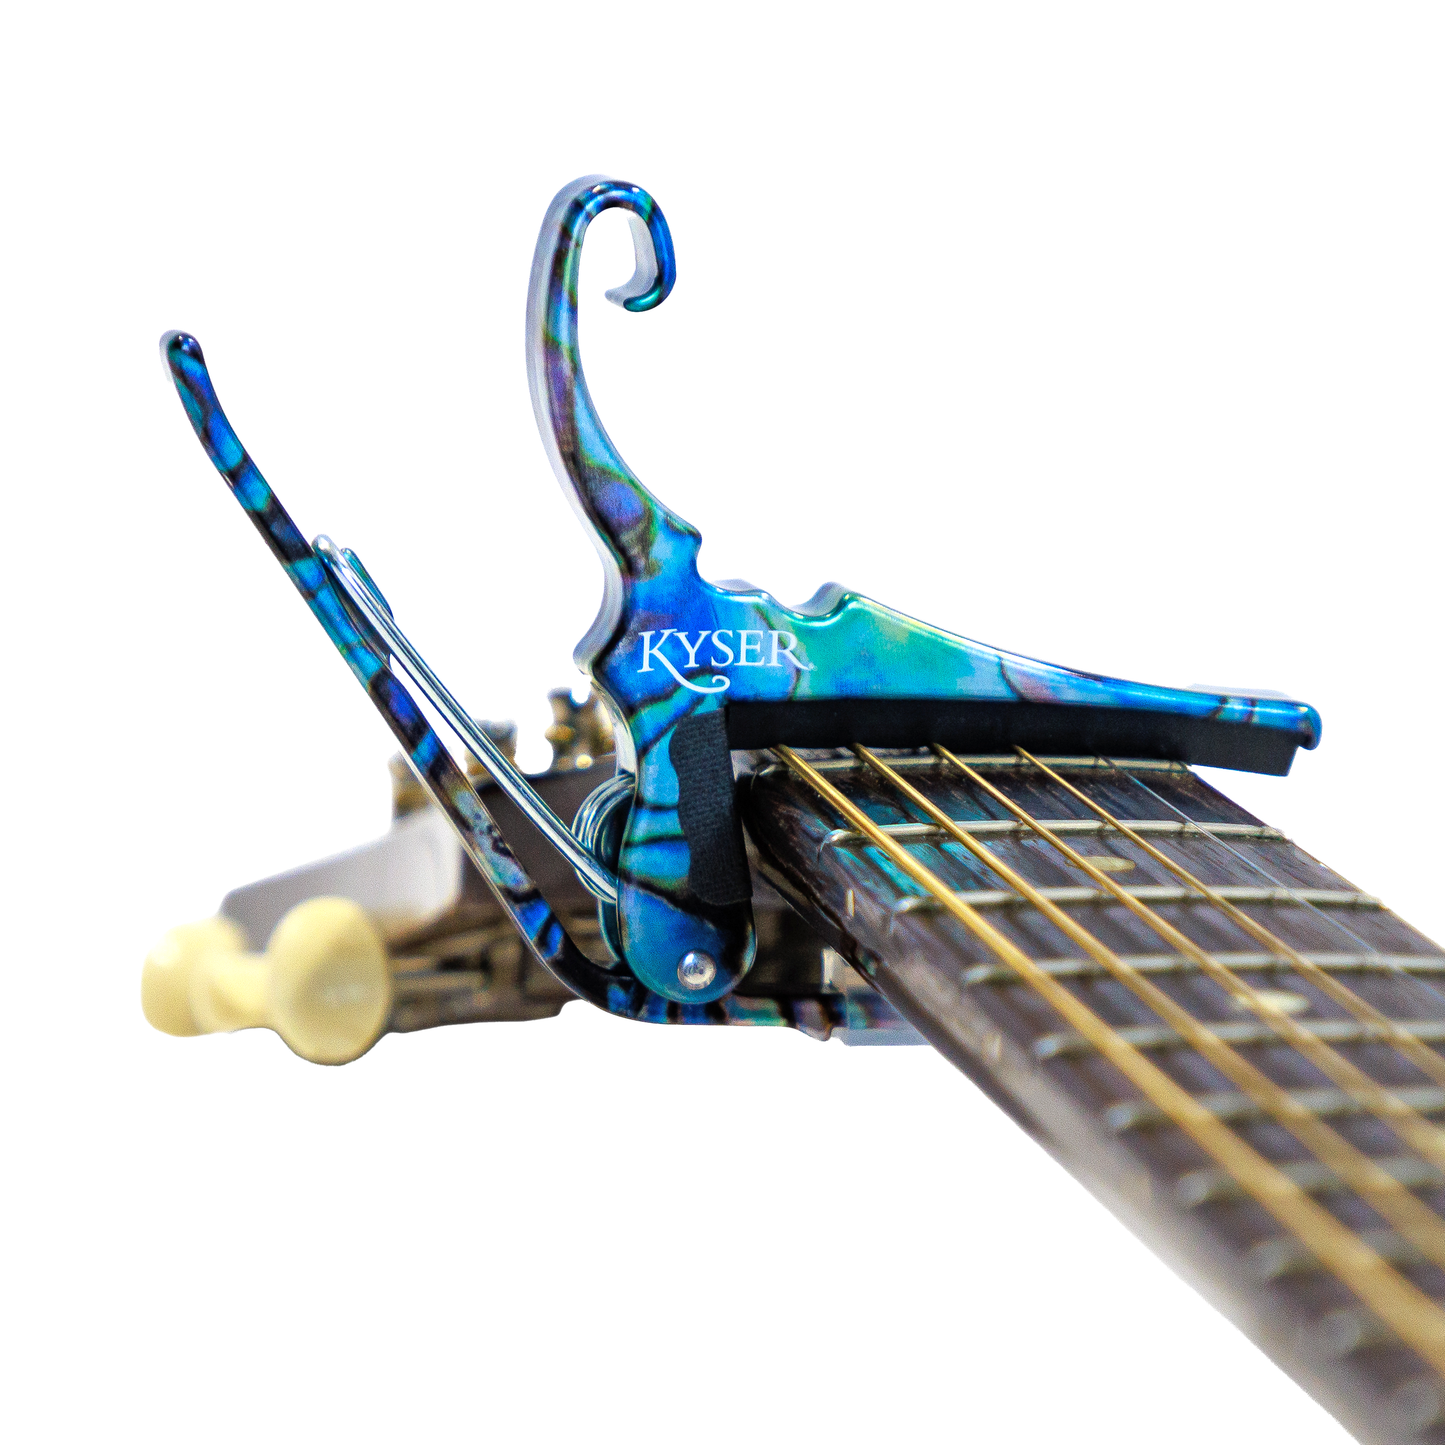 Kyser Quick Change Guitar Capo, Abalone on fretboard